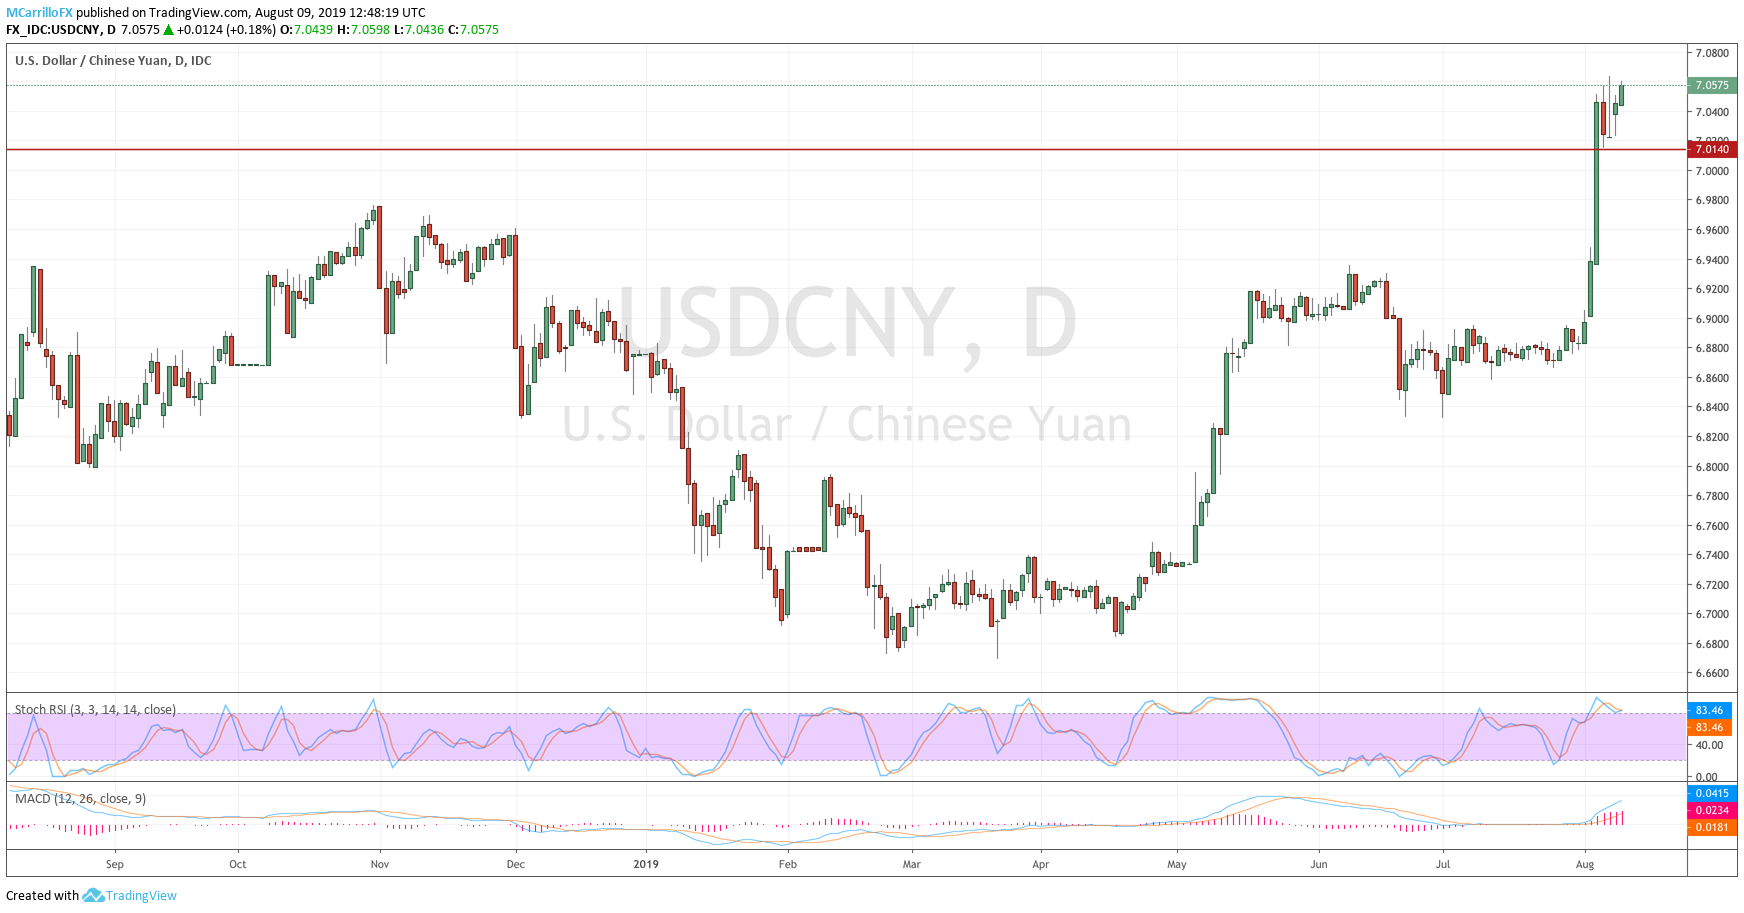 USDCNY daily chart August 9